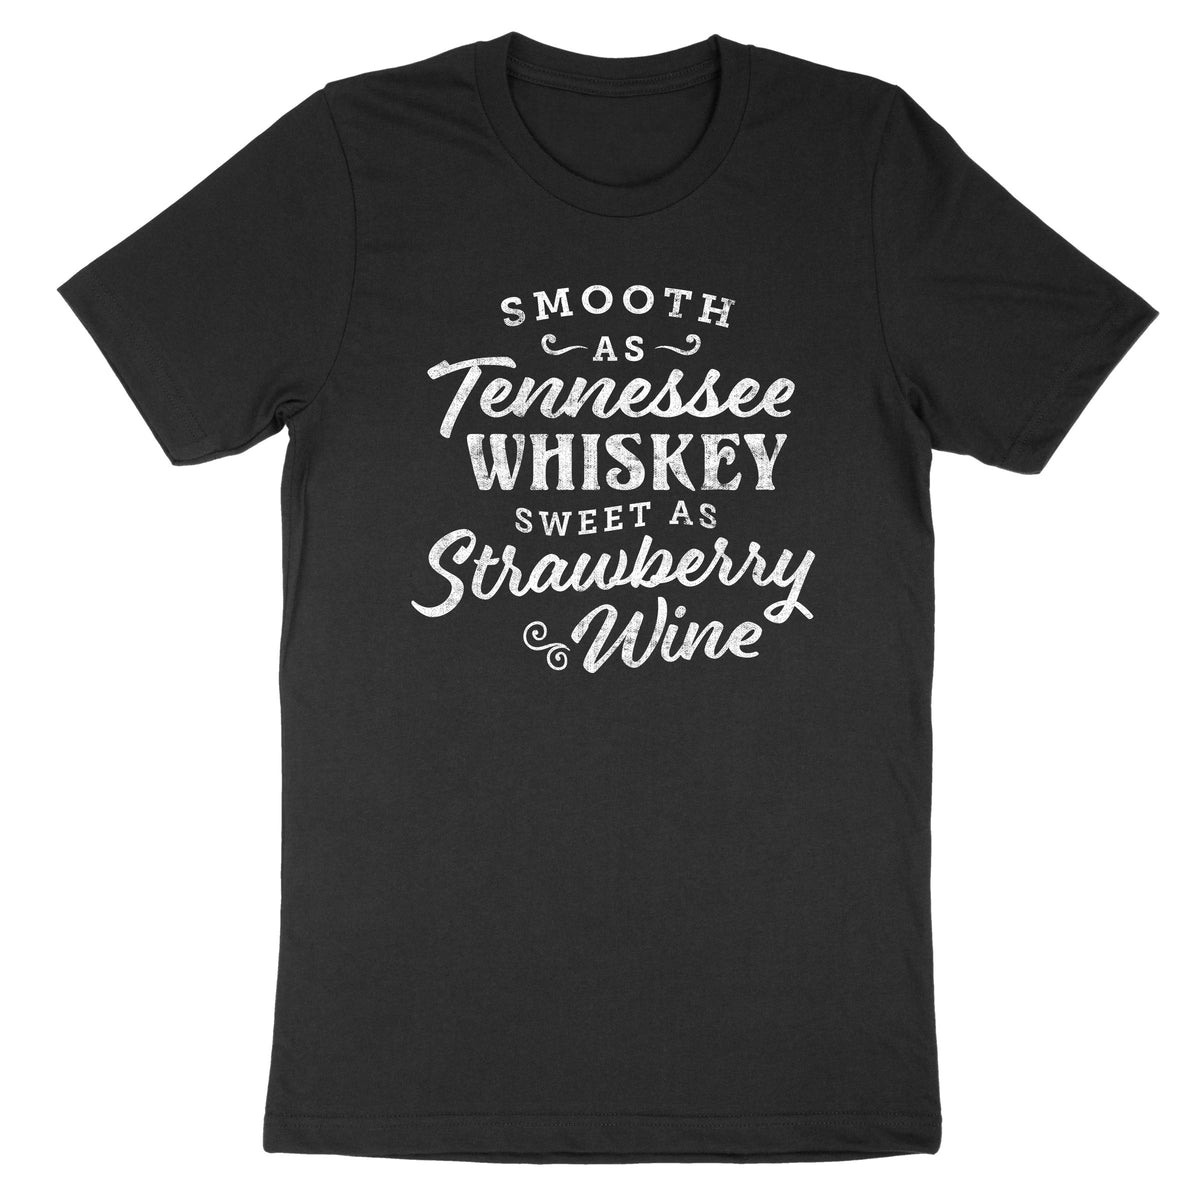 Tennessee Whiskey Strawberry Wine Tee